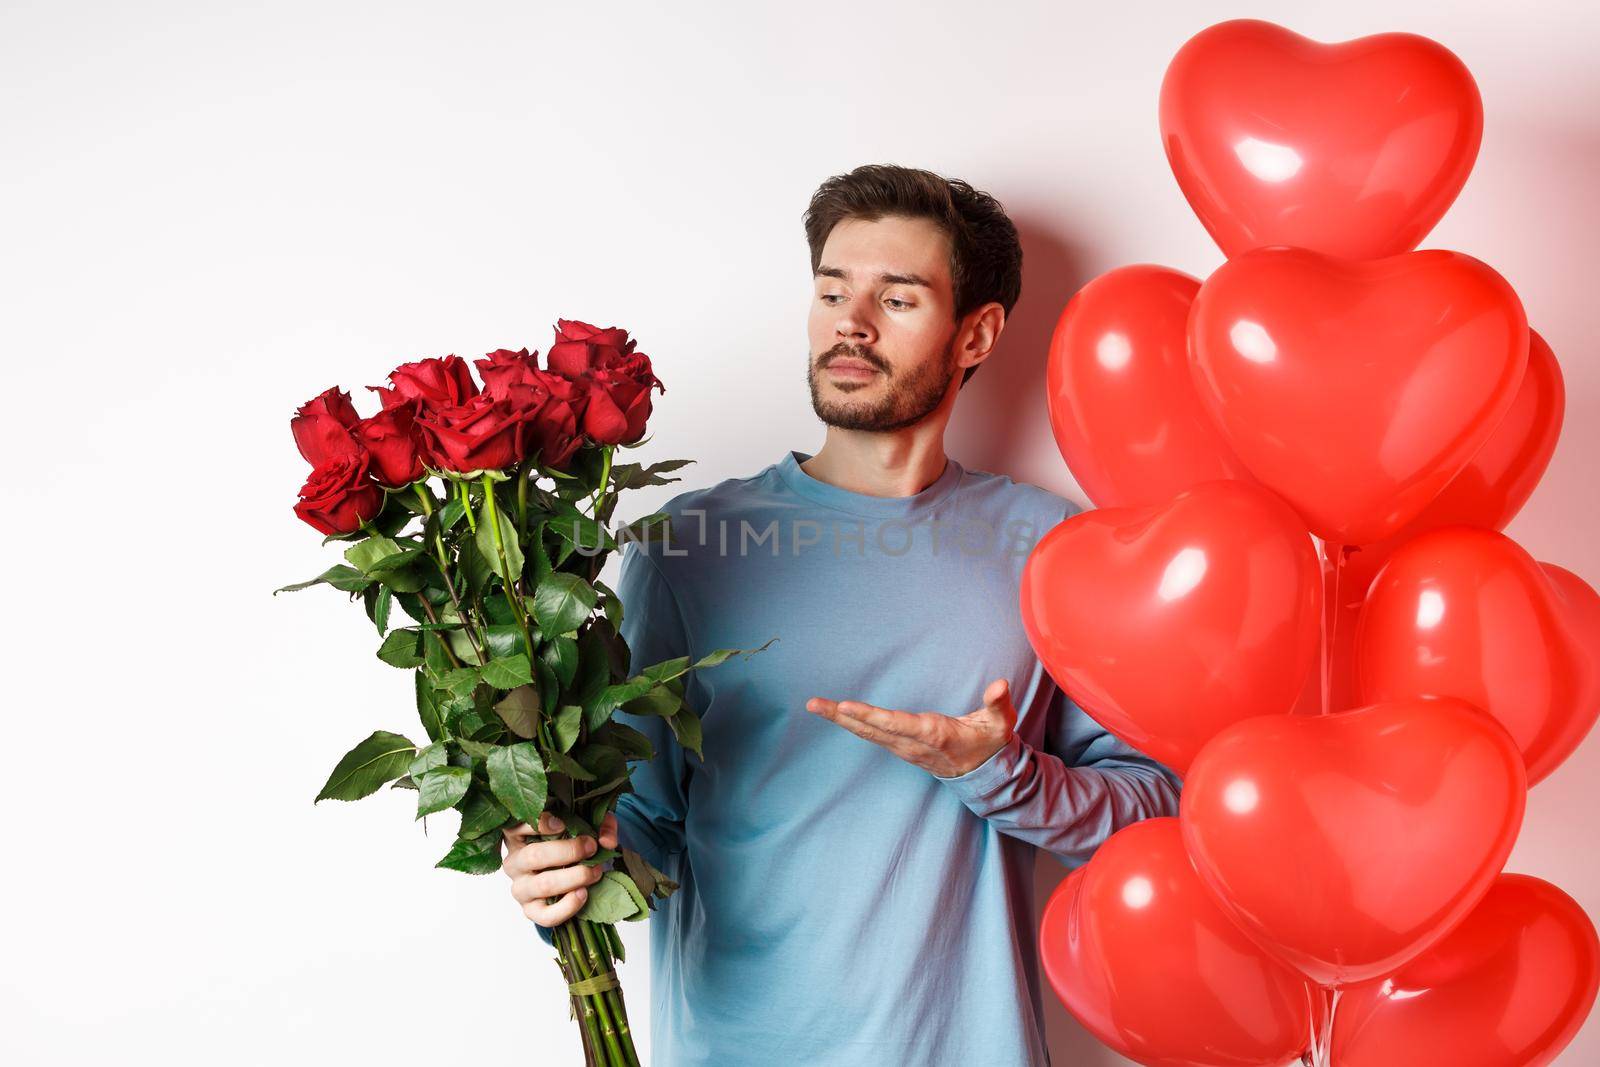 Romantic guy showing bouquet of red roses, pointing at flowers and standing near hearts balloons on Valentines day, prepare gifts for his lover, white background.